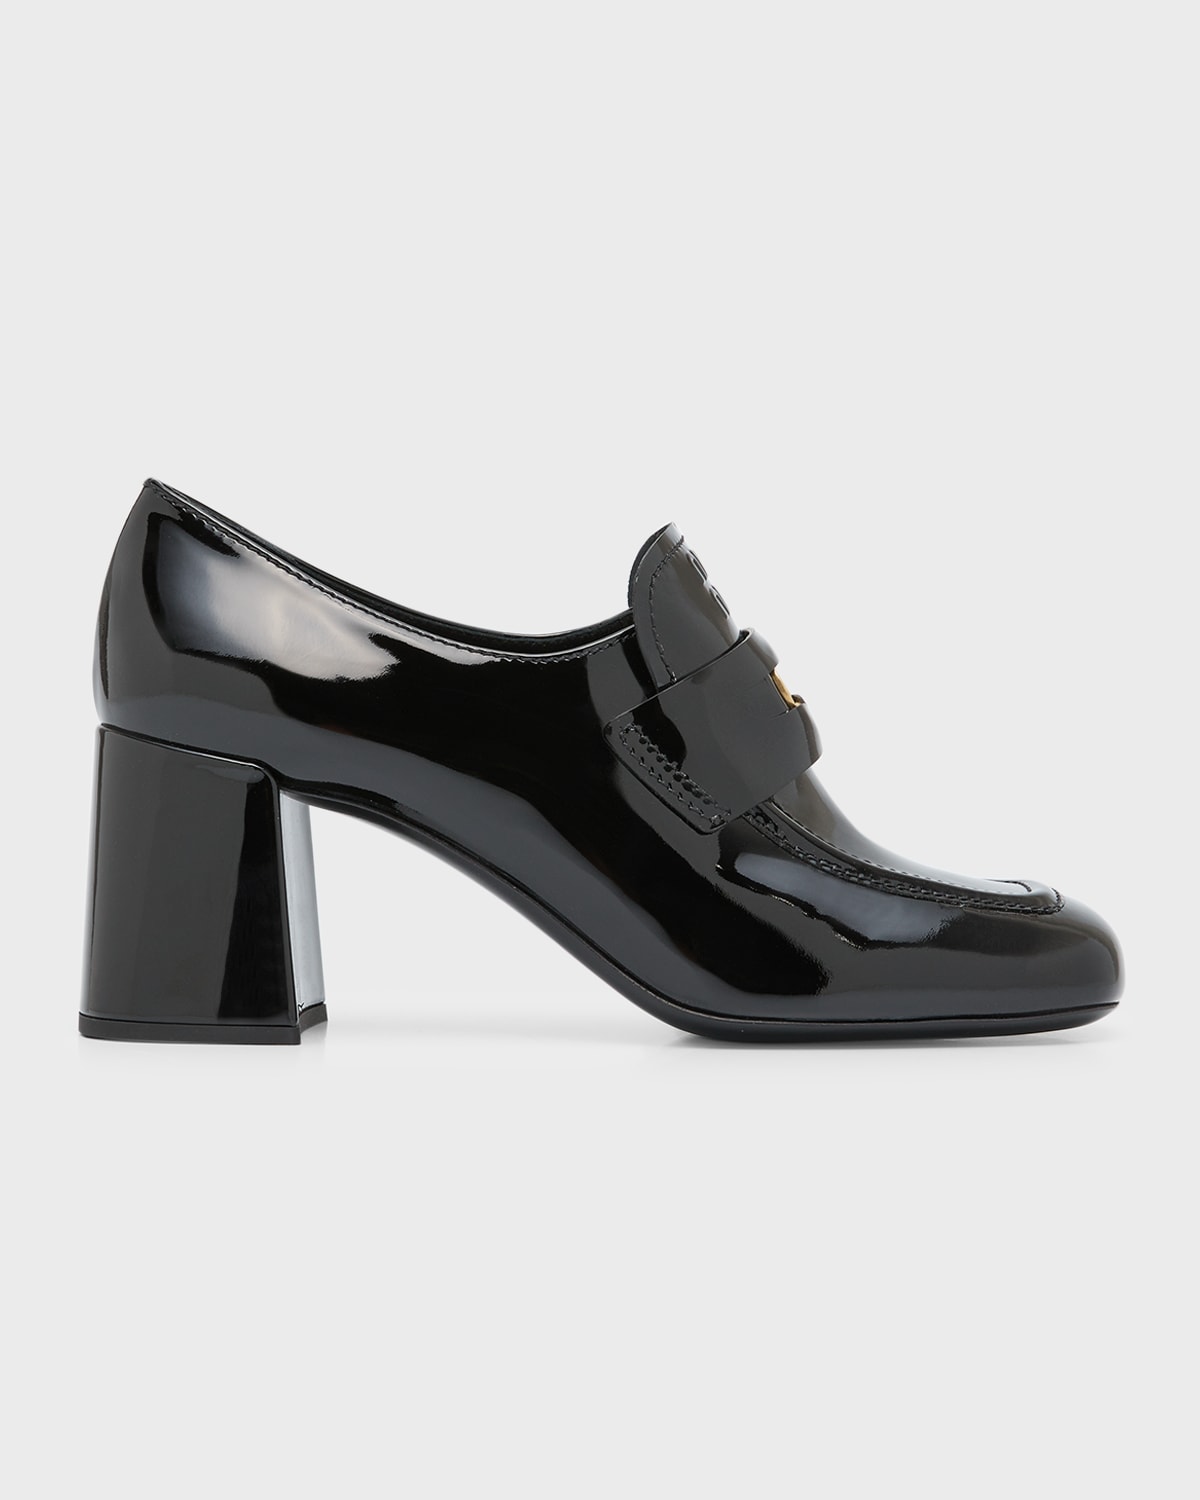 Miu Miu Patent Leather Heeled Penny Loafers In Black